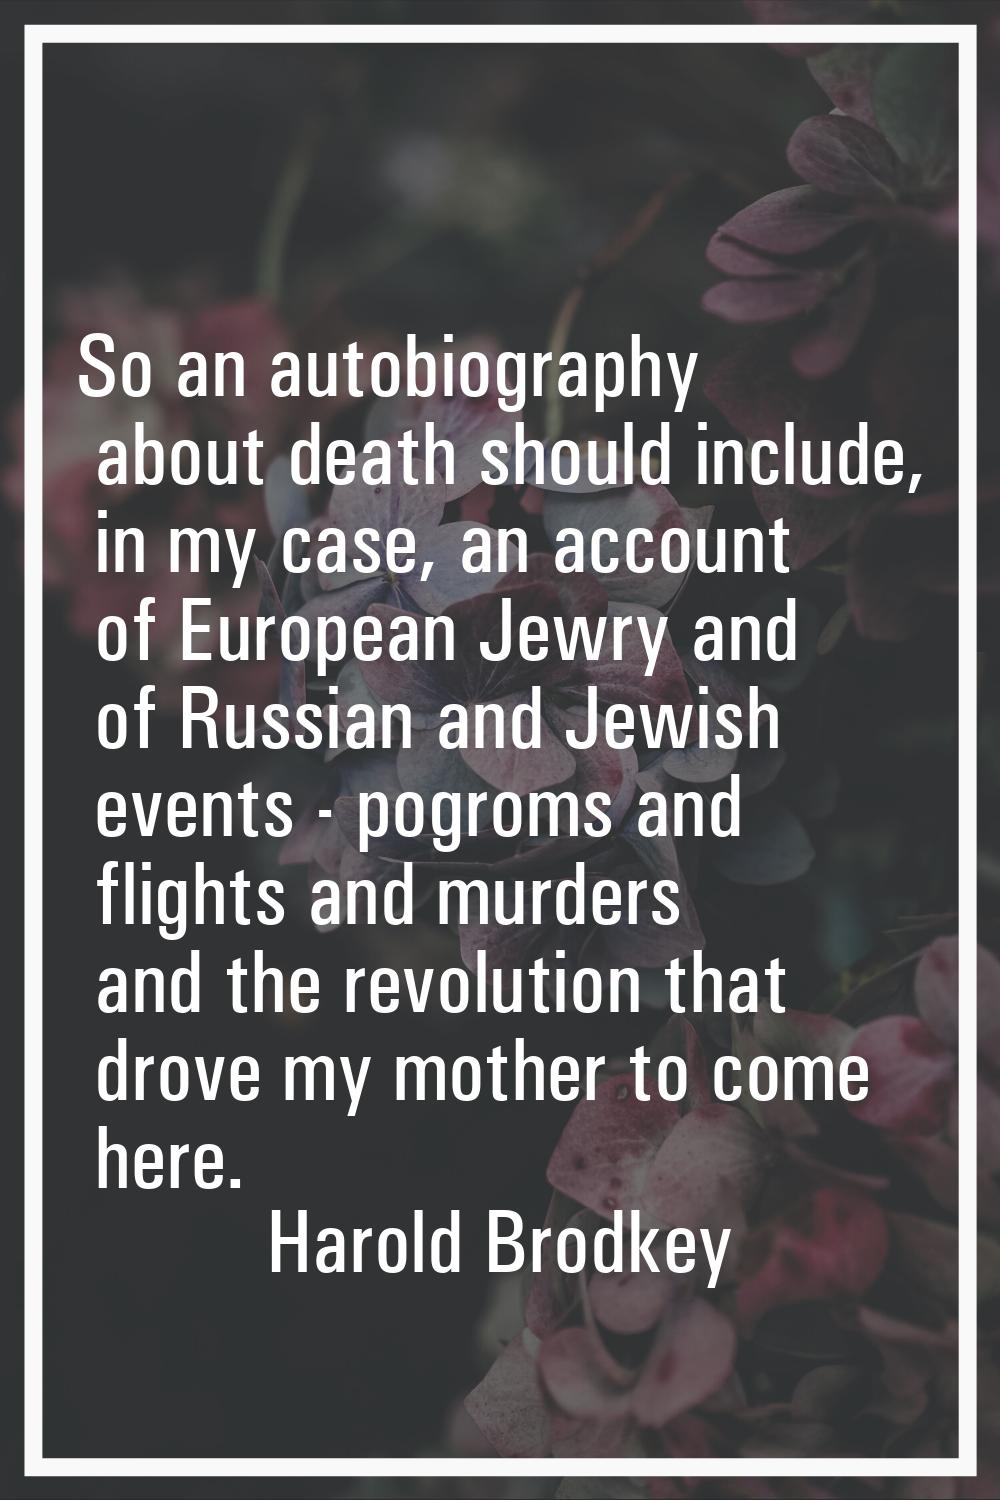 So an autobiography about death should include, in my case, an account of European Jewry and of Rus